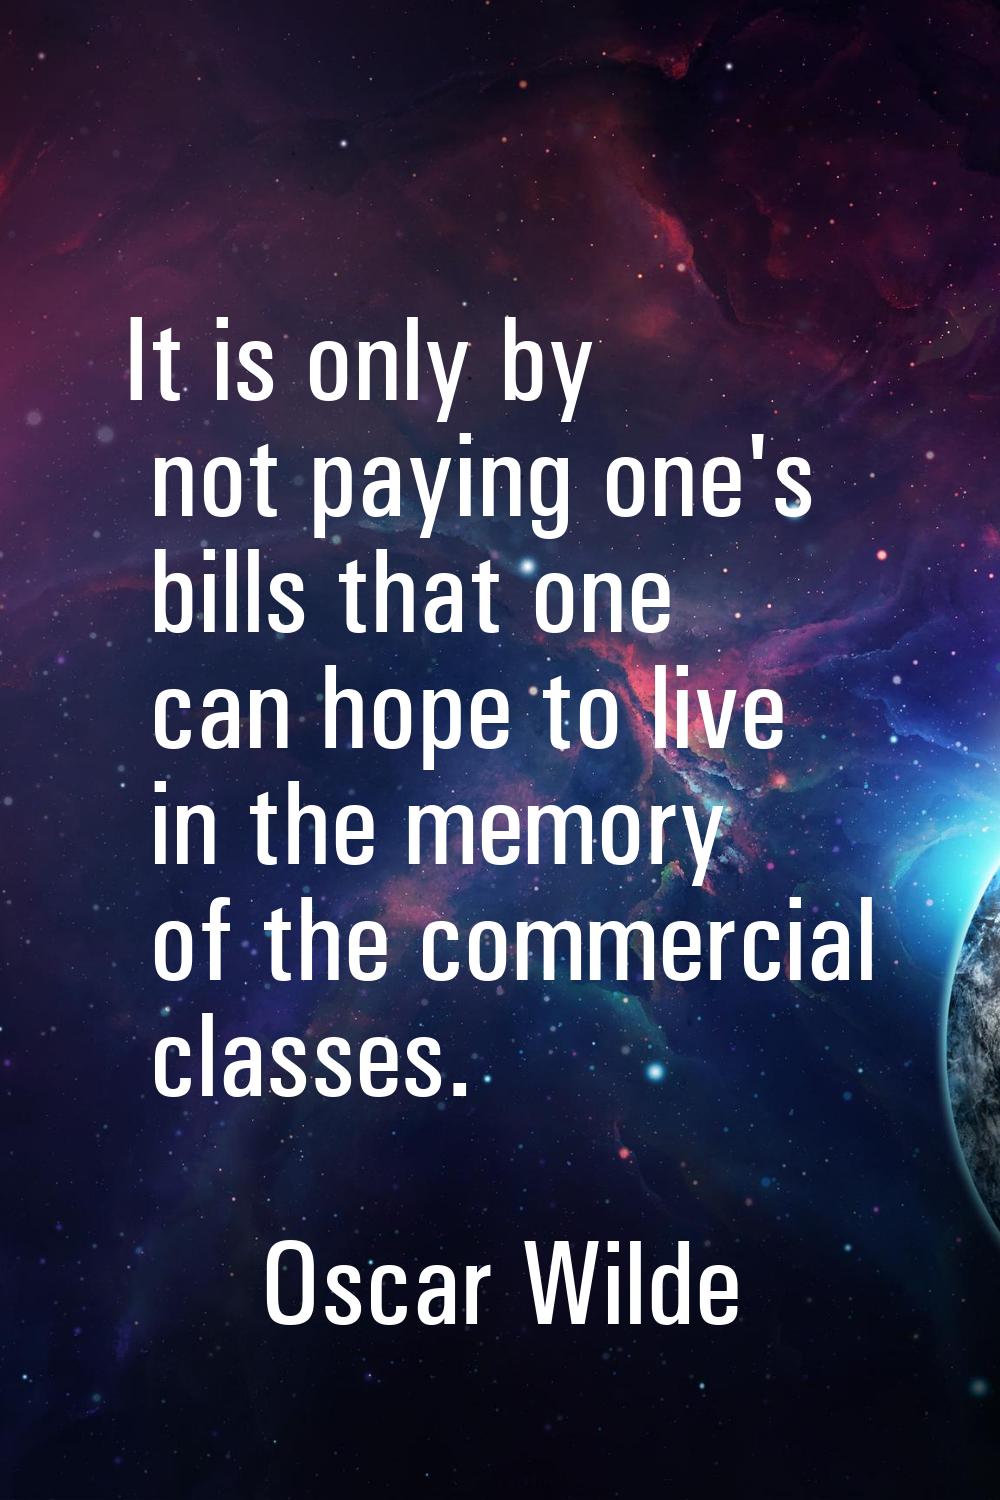 It is only by not paying one's bills that one can hope to live in the memory of the commercial clas